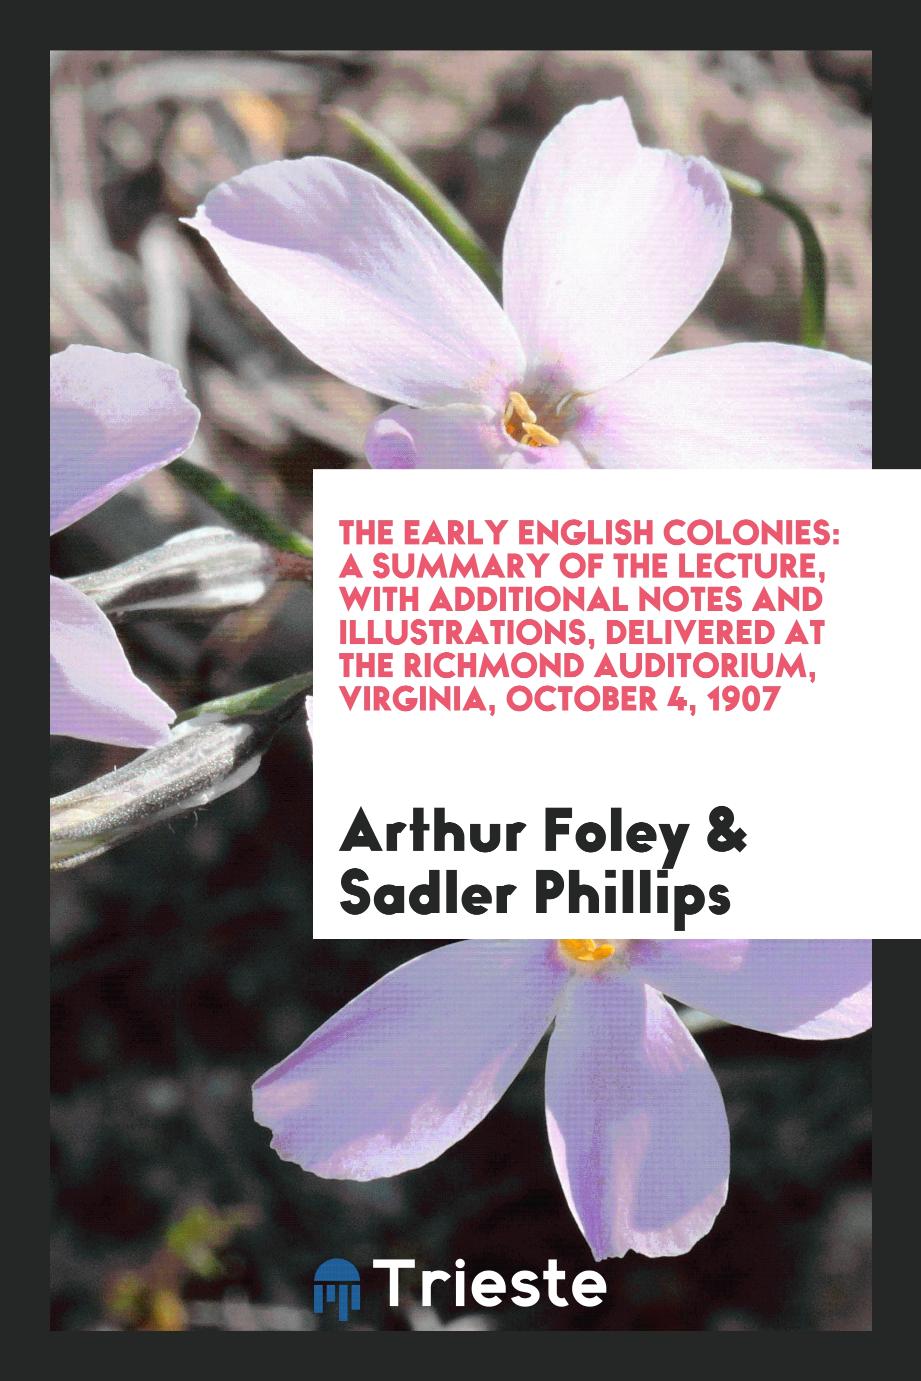 The early English colonies: a summary of the lecture, with additional notes and illustrations, delivered at the Richmond auditorium, Virginia, October 4, 1907